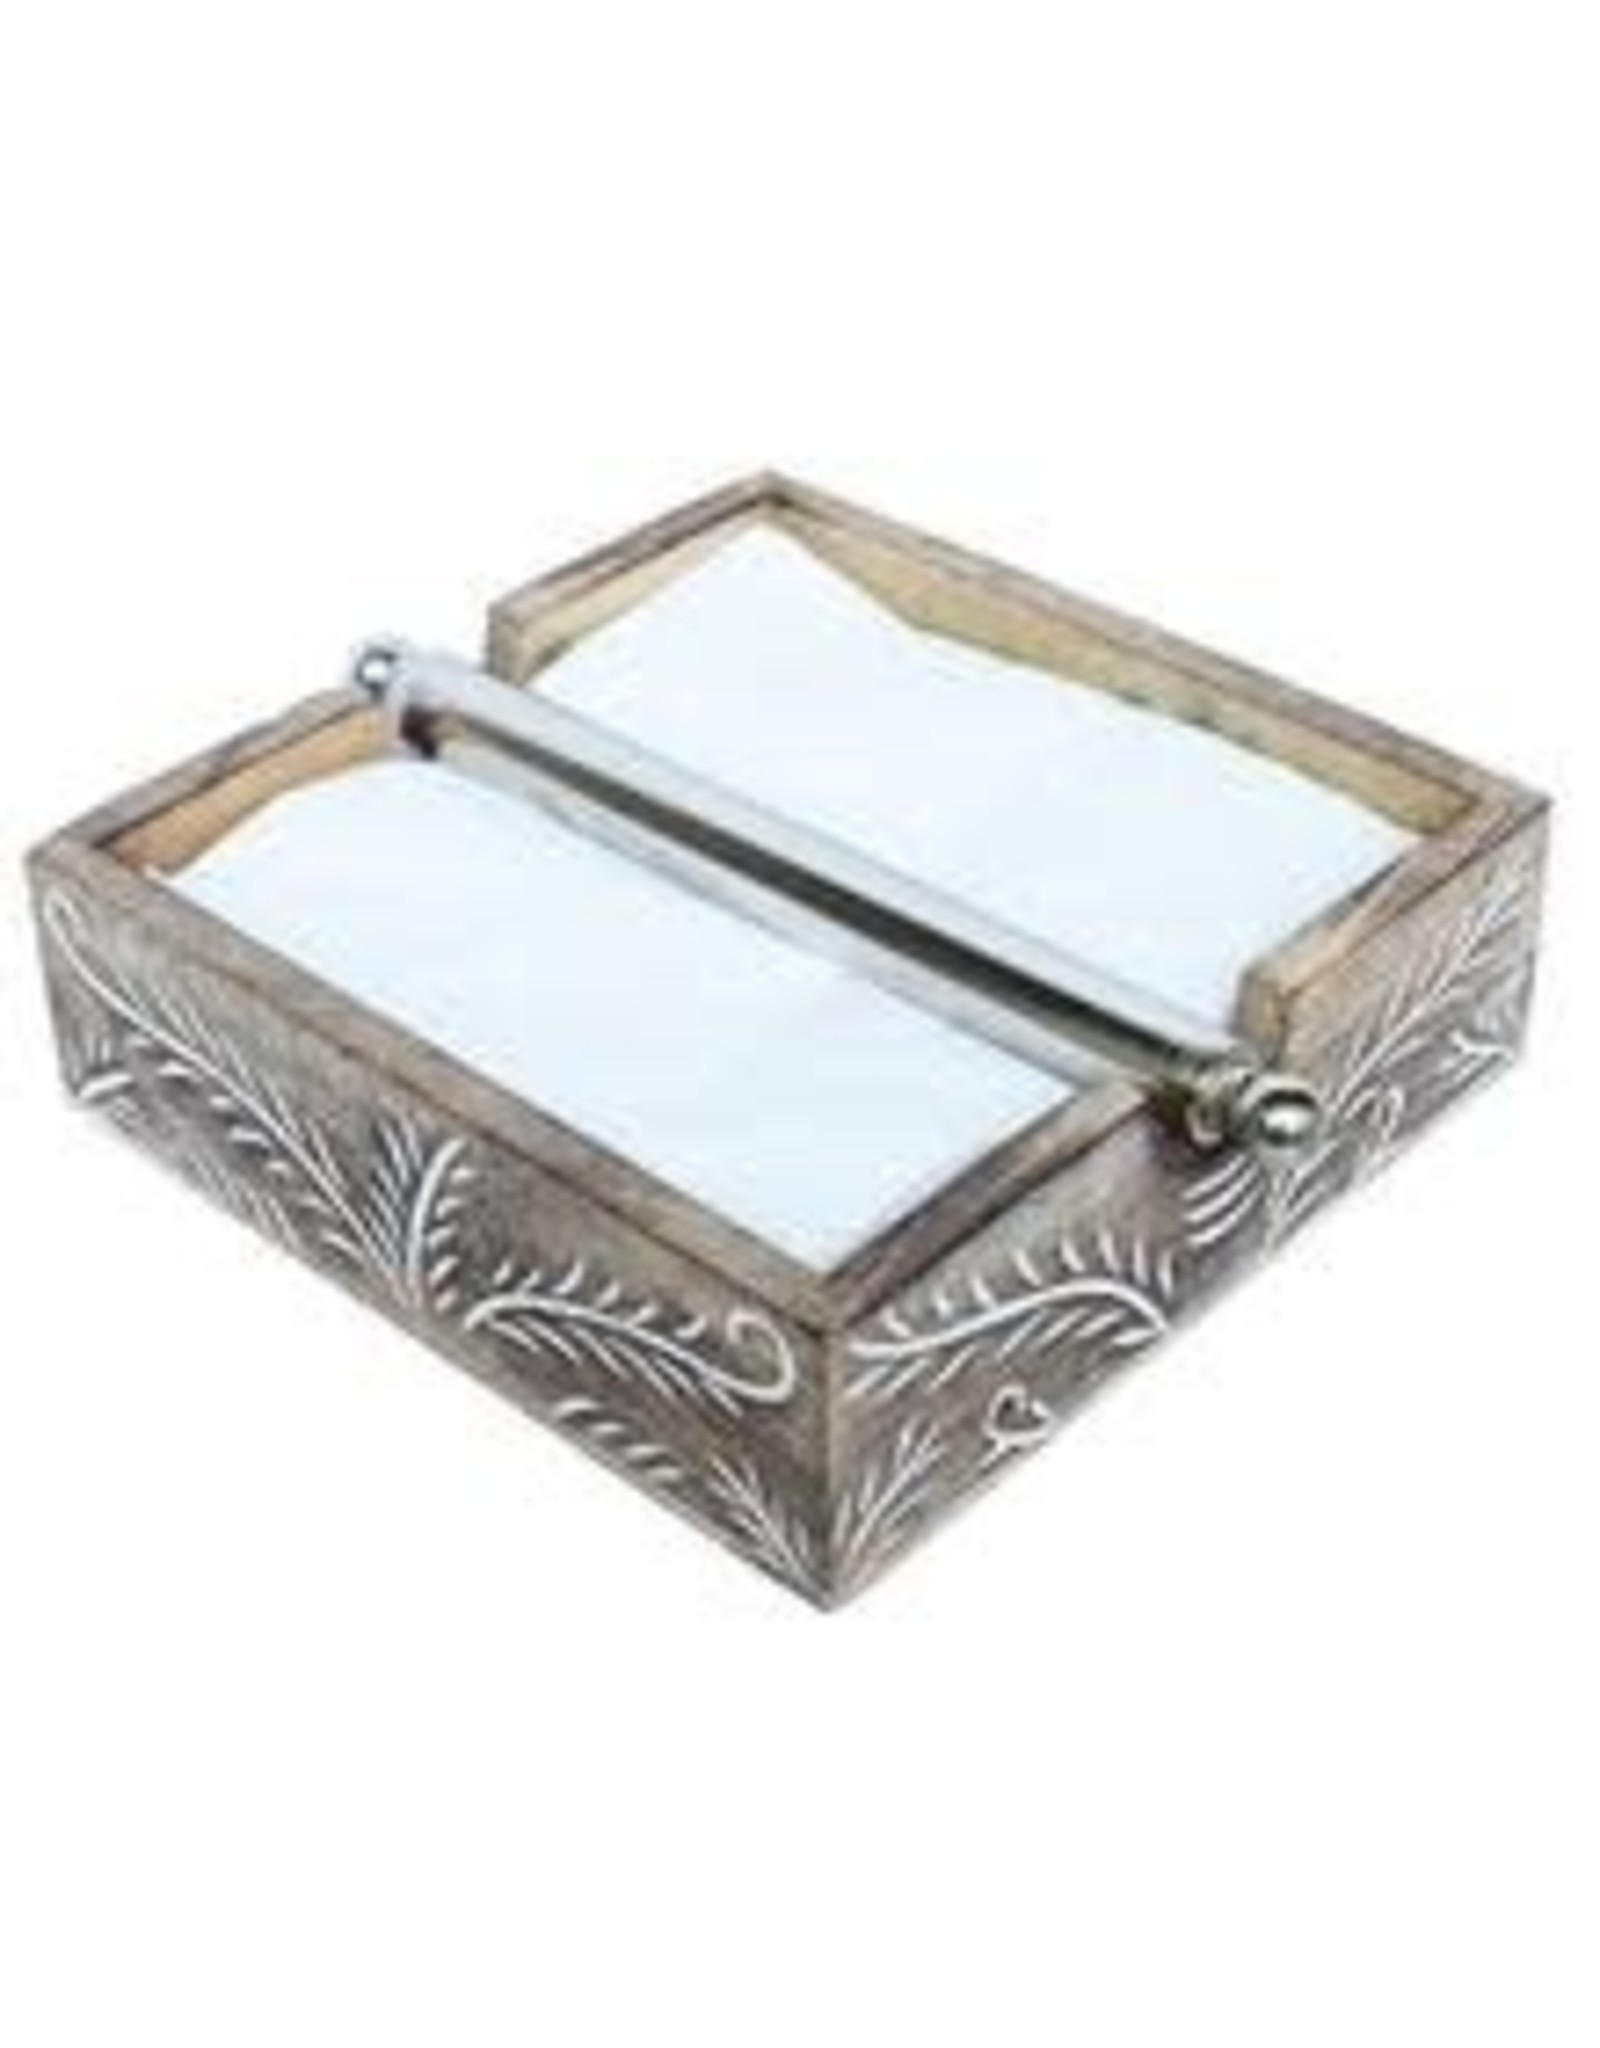 Trade roots Weighted Napkin Holder, India